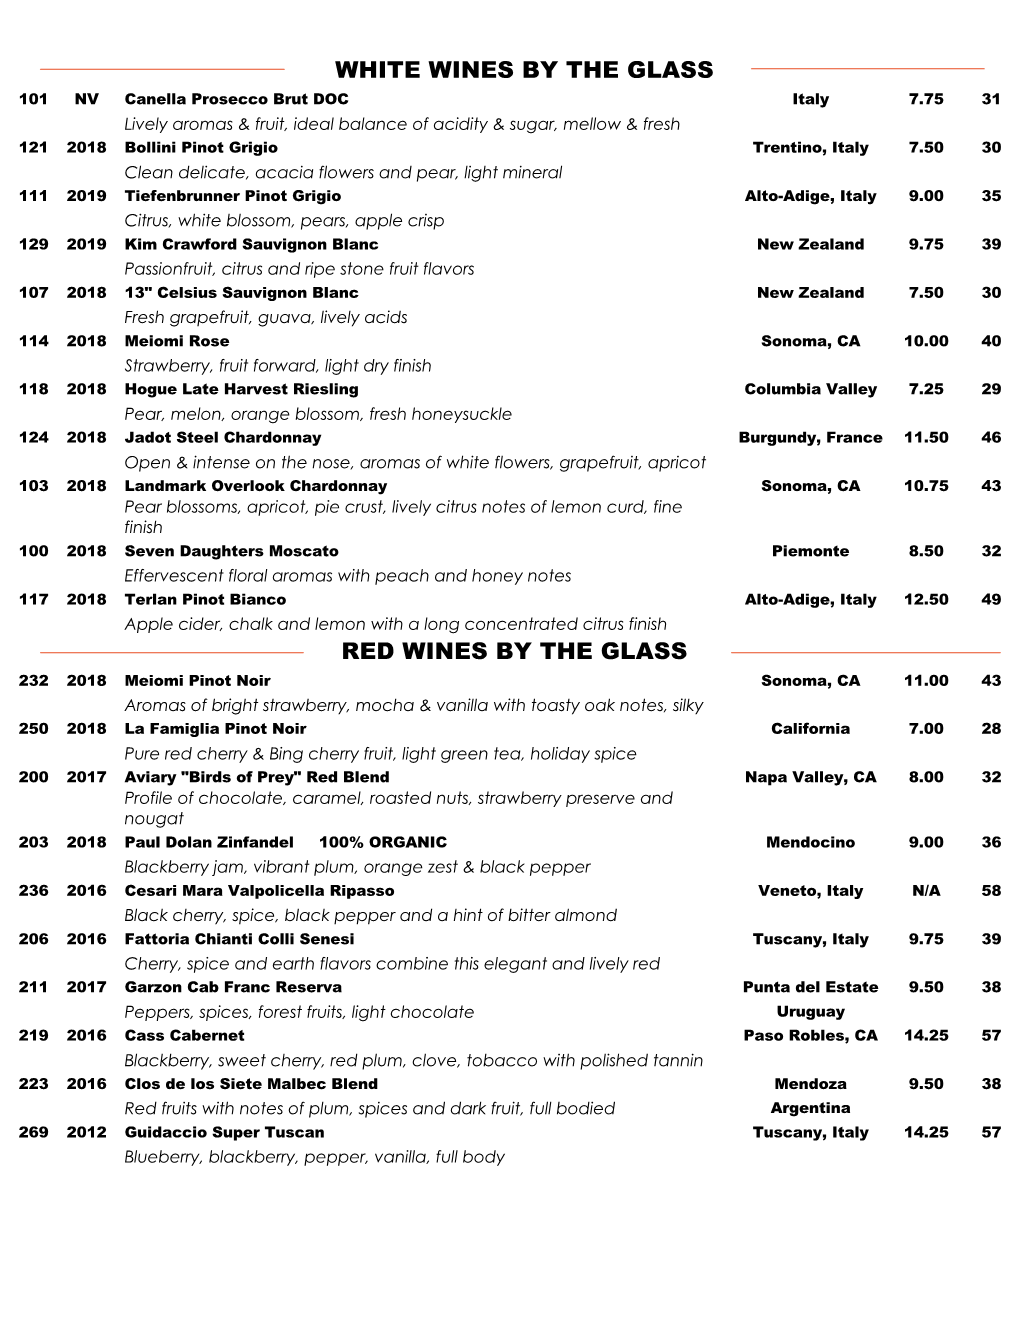 White Wines by the Glass Red Wines by the Glass